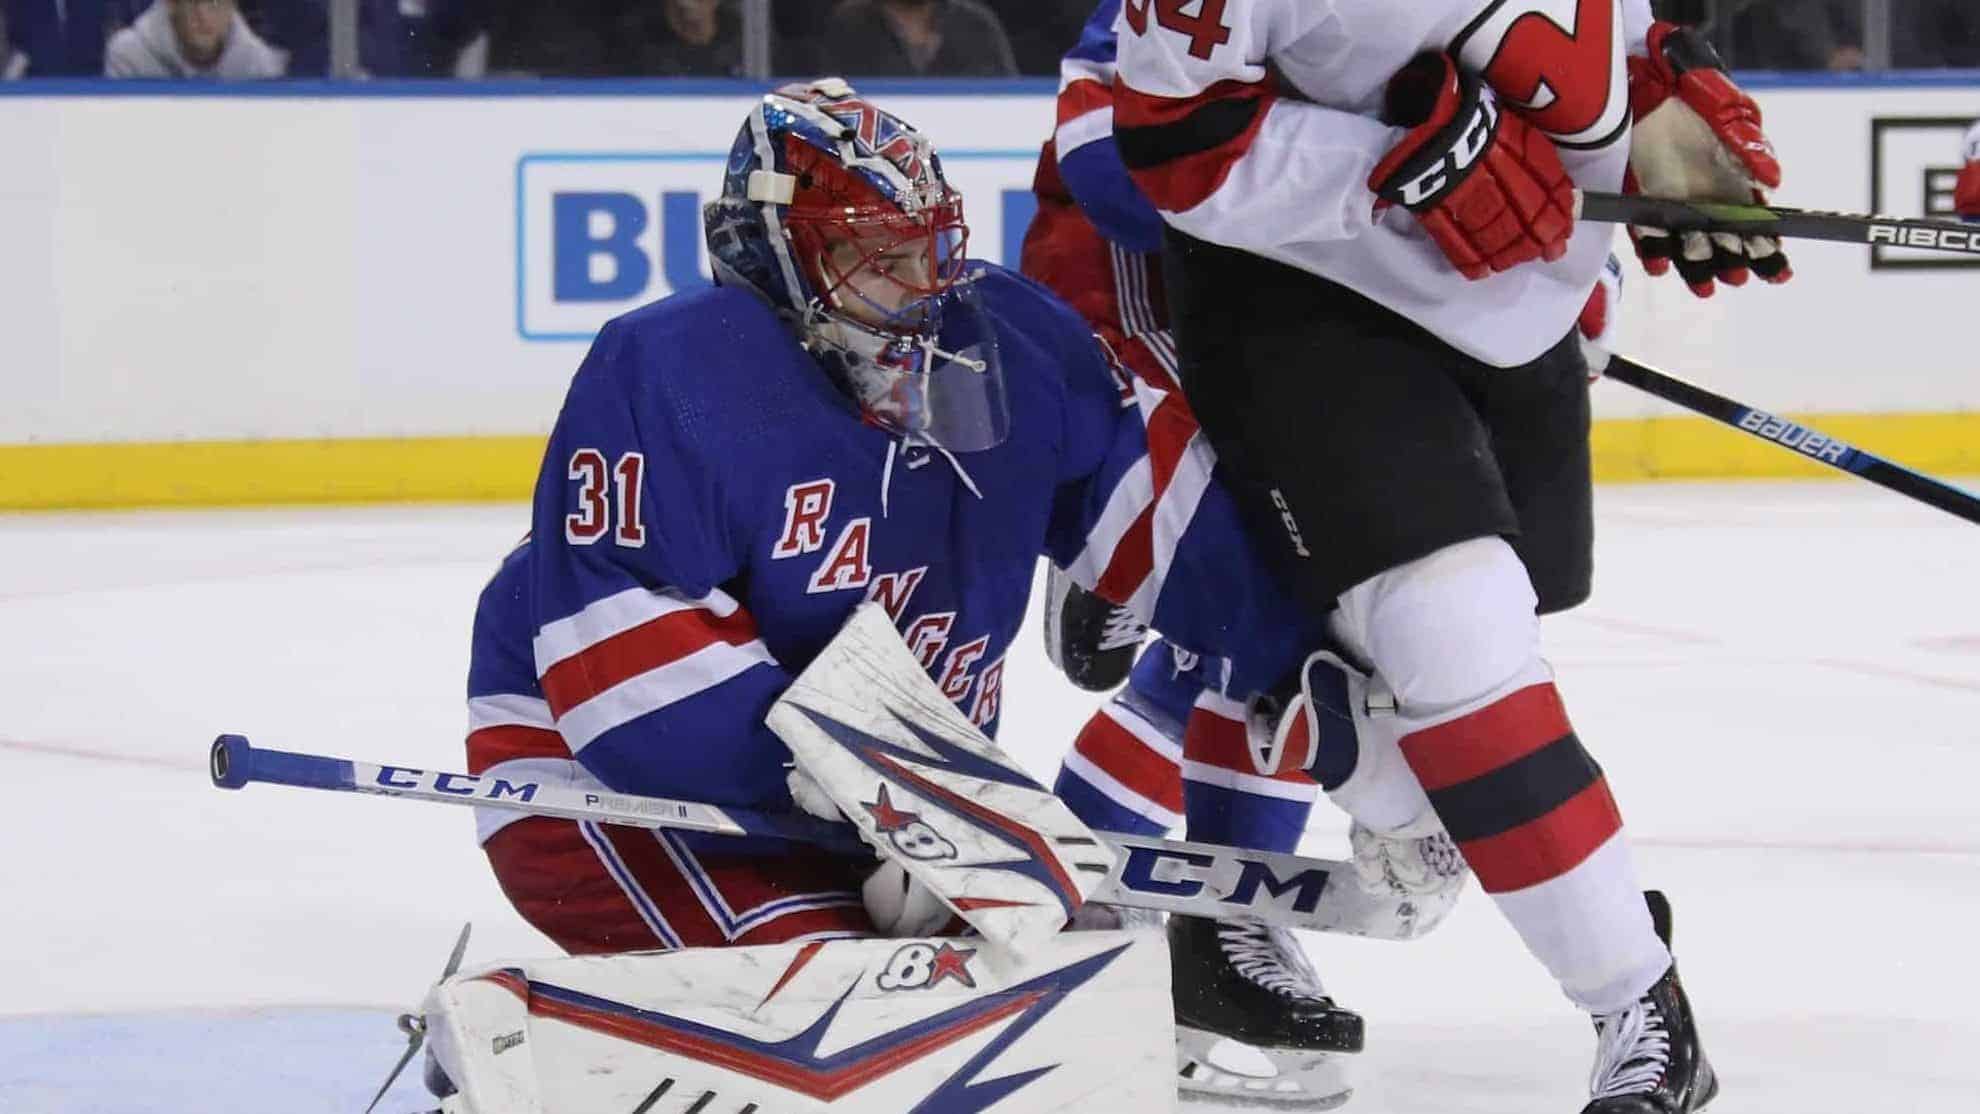 NEW YORK, NEW YORK - SEPTEMBER 18: Igor Shesterkin #31 of the New York Rangers defends the net against Brandon Baddock #34 of the New Jersey Devils during the third period at Madison Square Garden on September 18, 2019 in New York City. The Devils defeated the Rangers 4-3.